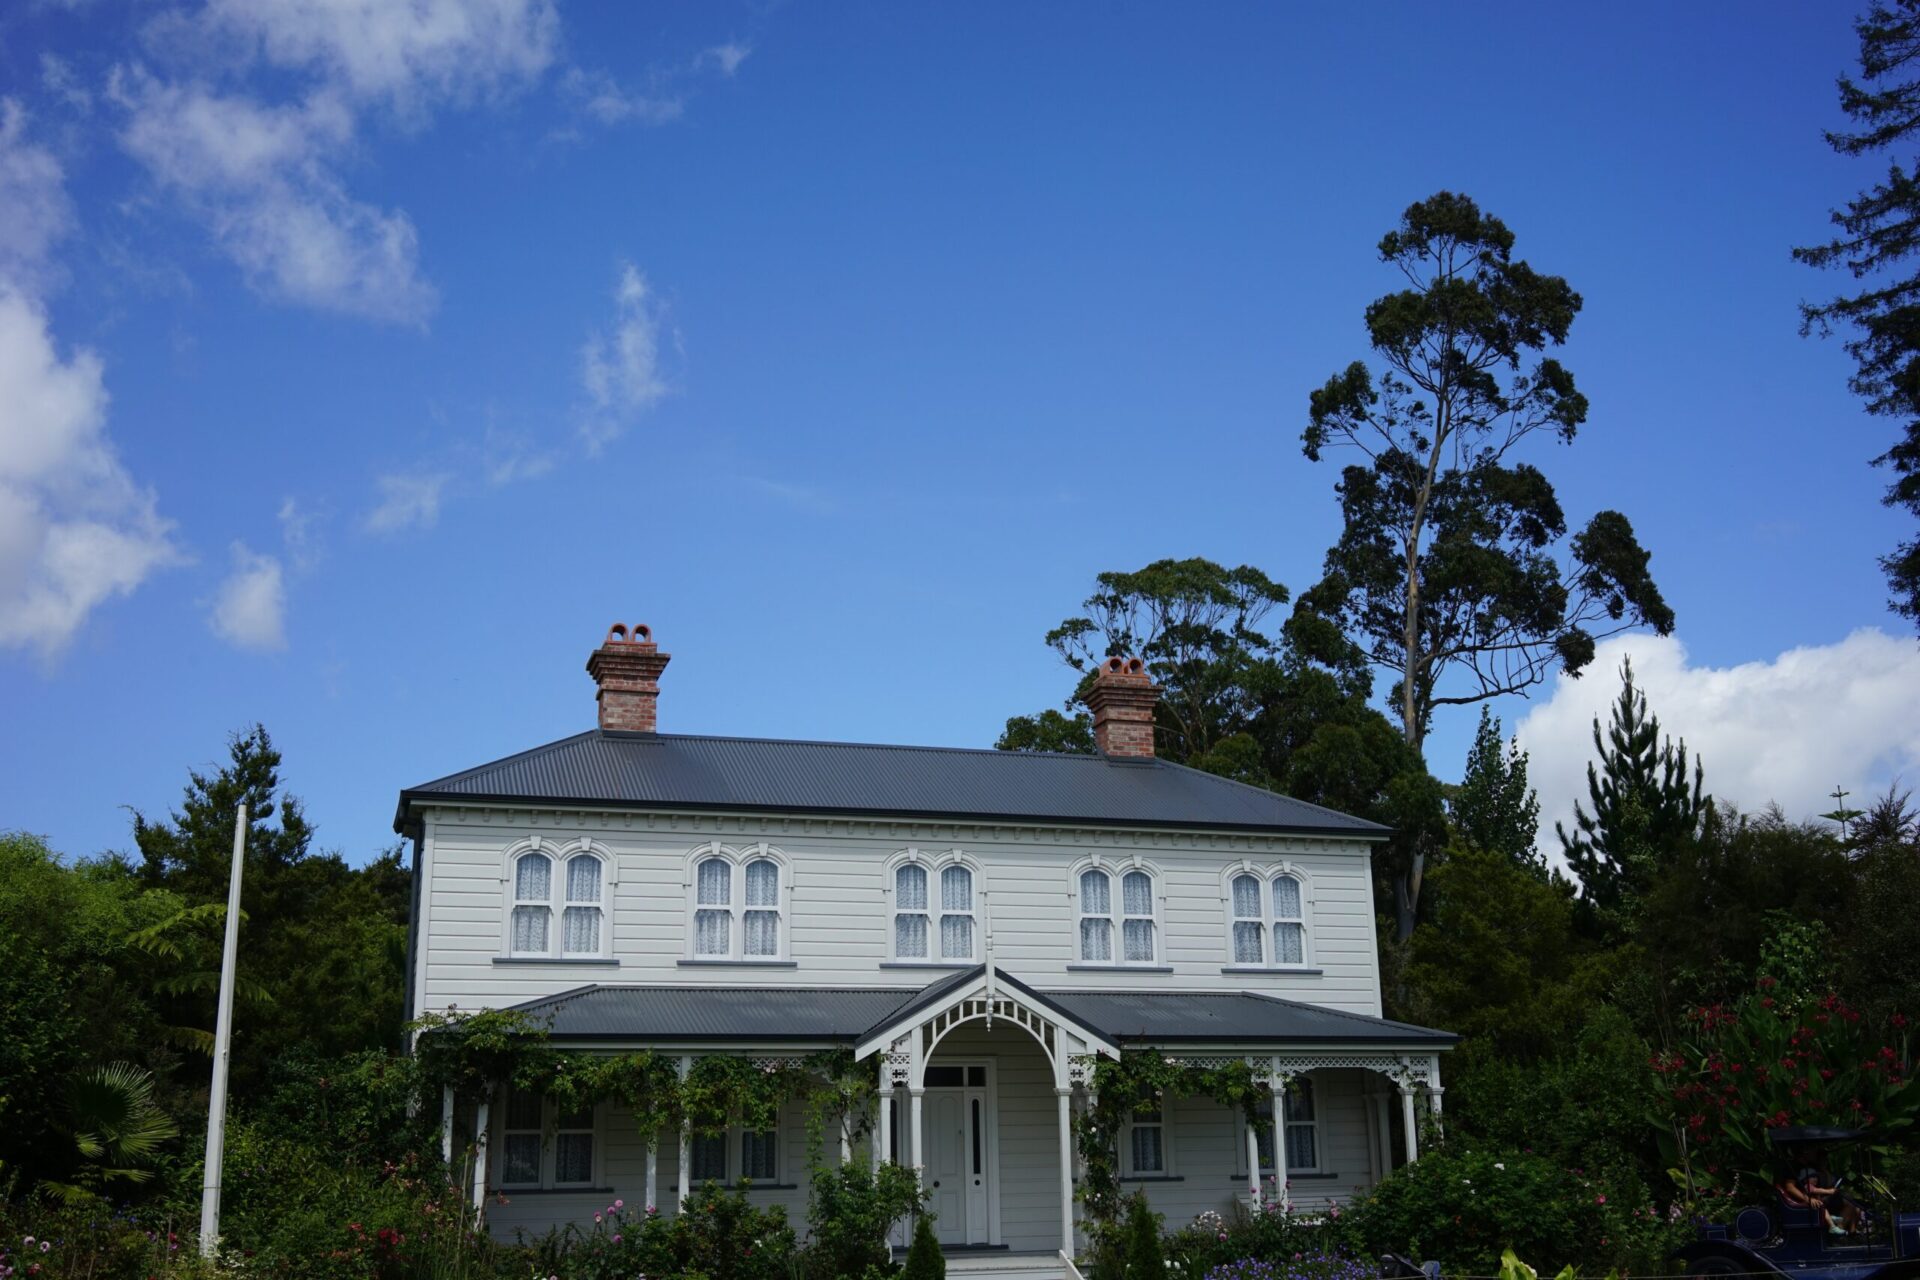 A beautiful shot of a white building in Hamilton Gardens, New Zealand under a blue sky